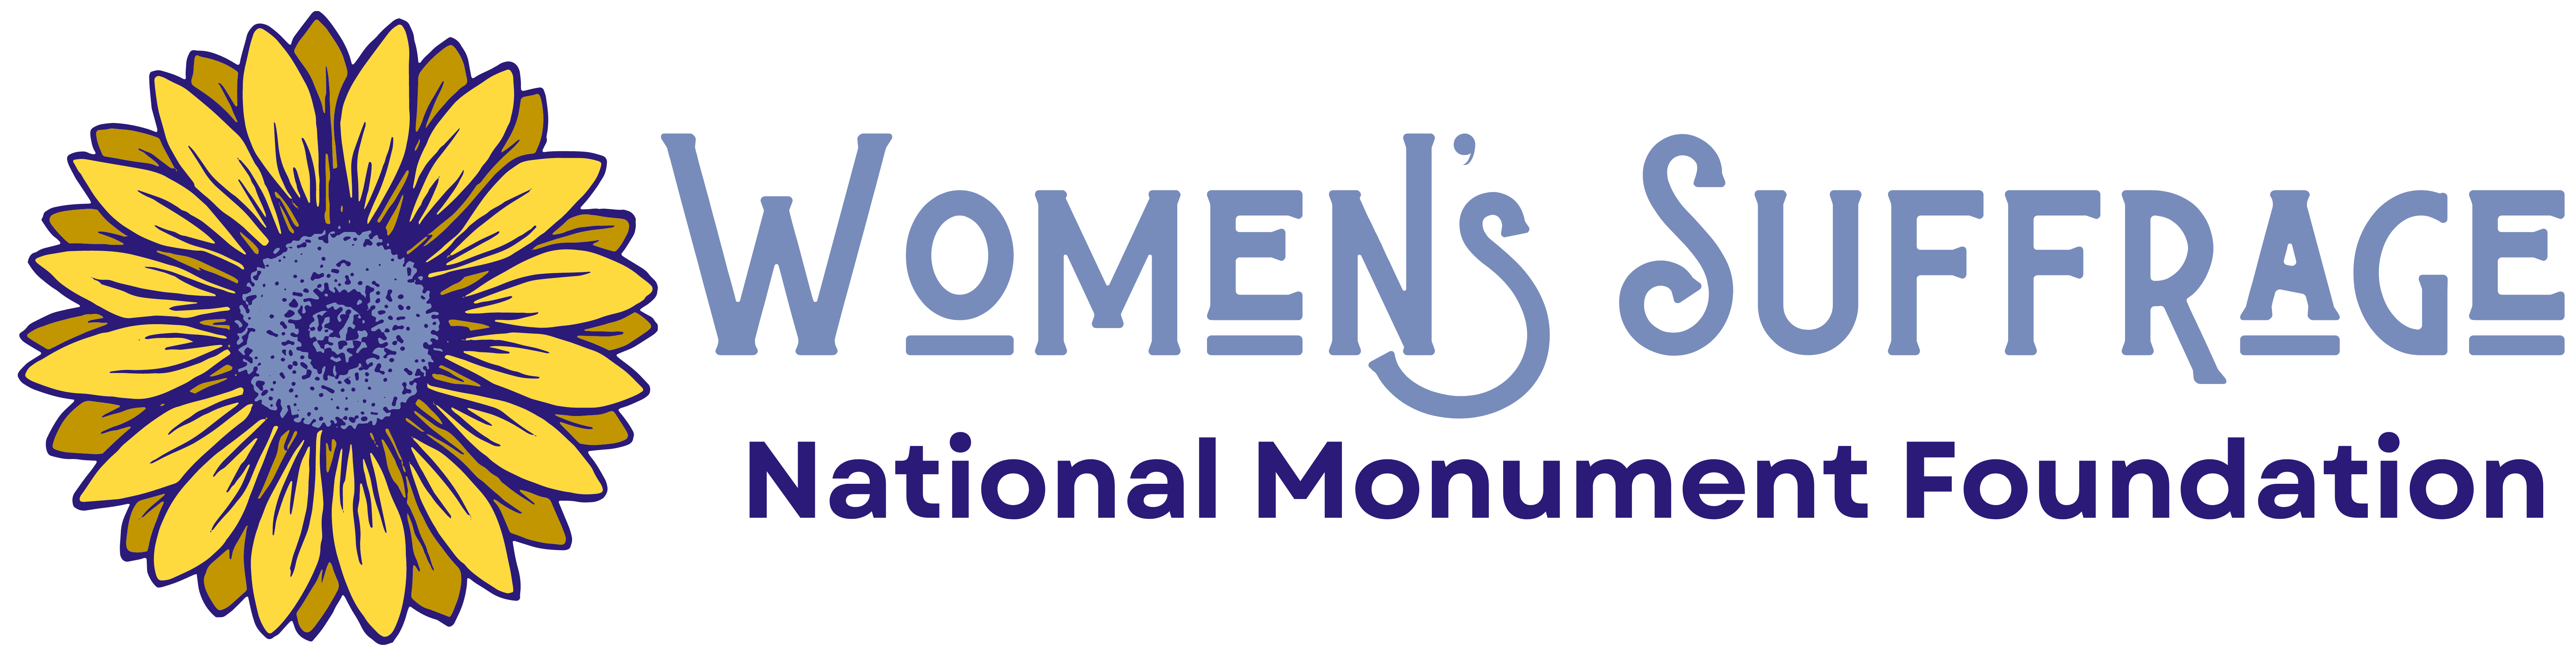 Women's Suffrage National Monument Foundation logo